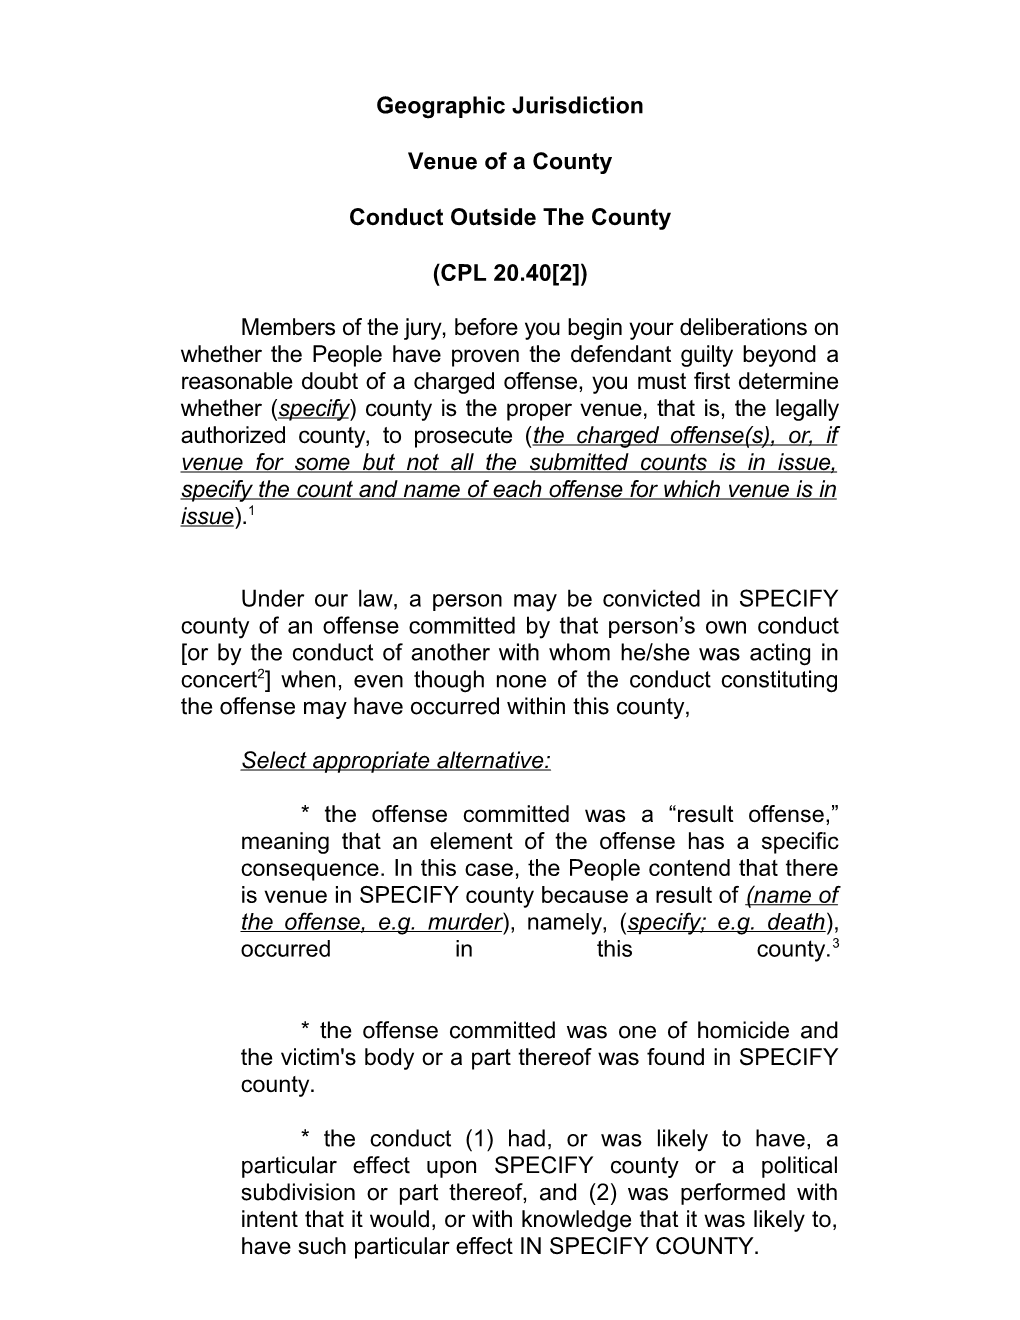 Geographic Jurisdiction Venue of a County Conduct Outside the County (CPL 20.40 2 )